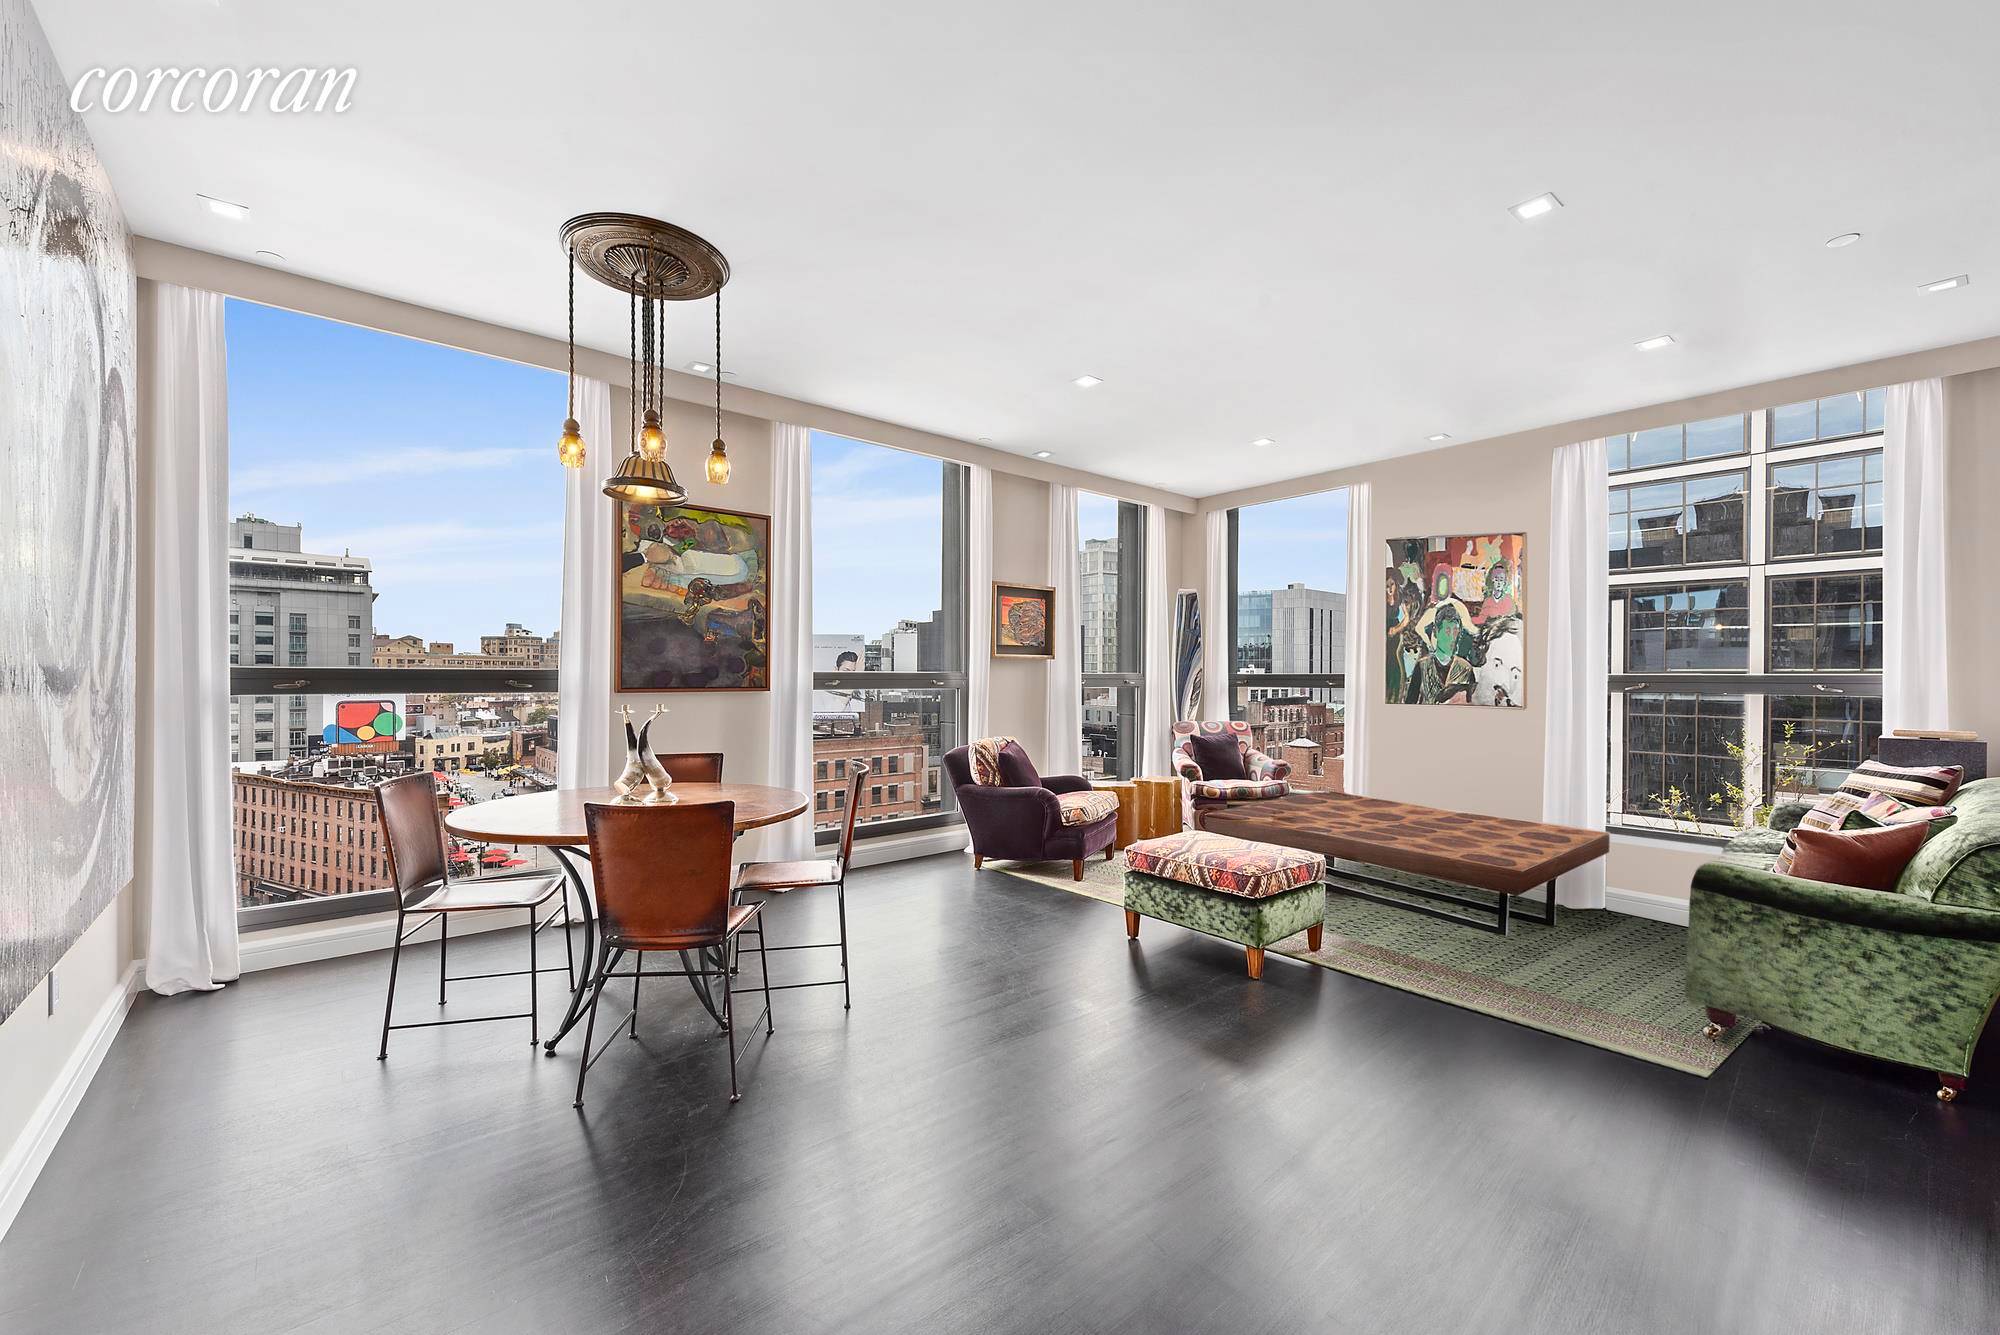 Flawless designer finishes and outstanding city views take center stage in this artfully gut renovated two bedroom, two bathroom showplace in a renowned Chelsea condominium.